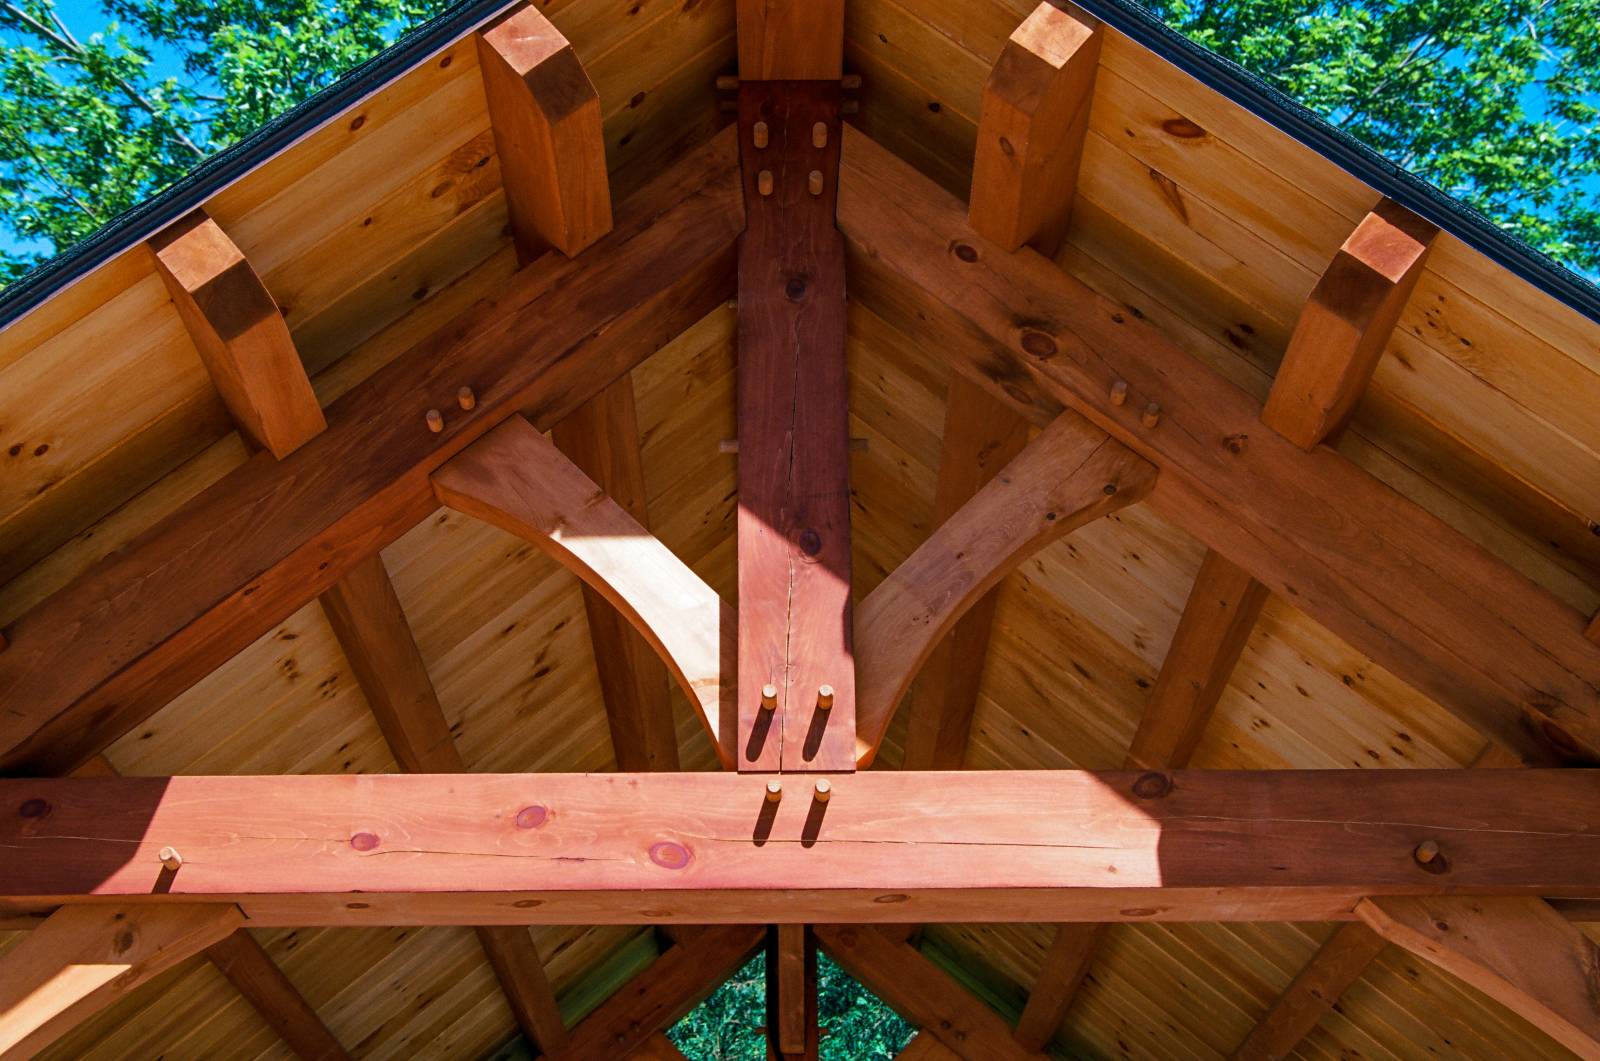 Visible oak pegs in the king post truss & throughout the pavilion